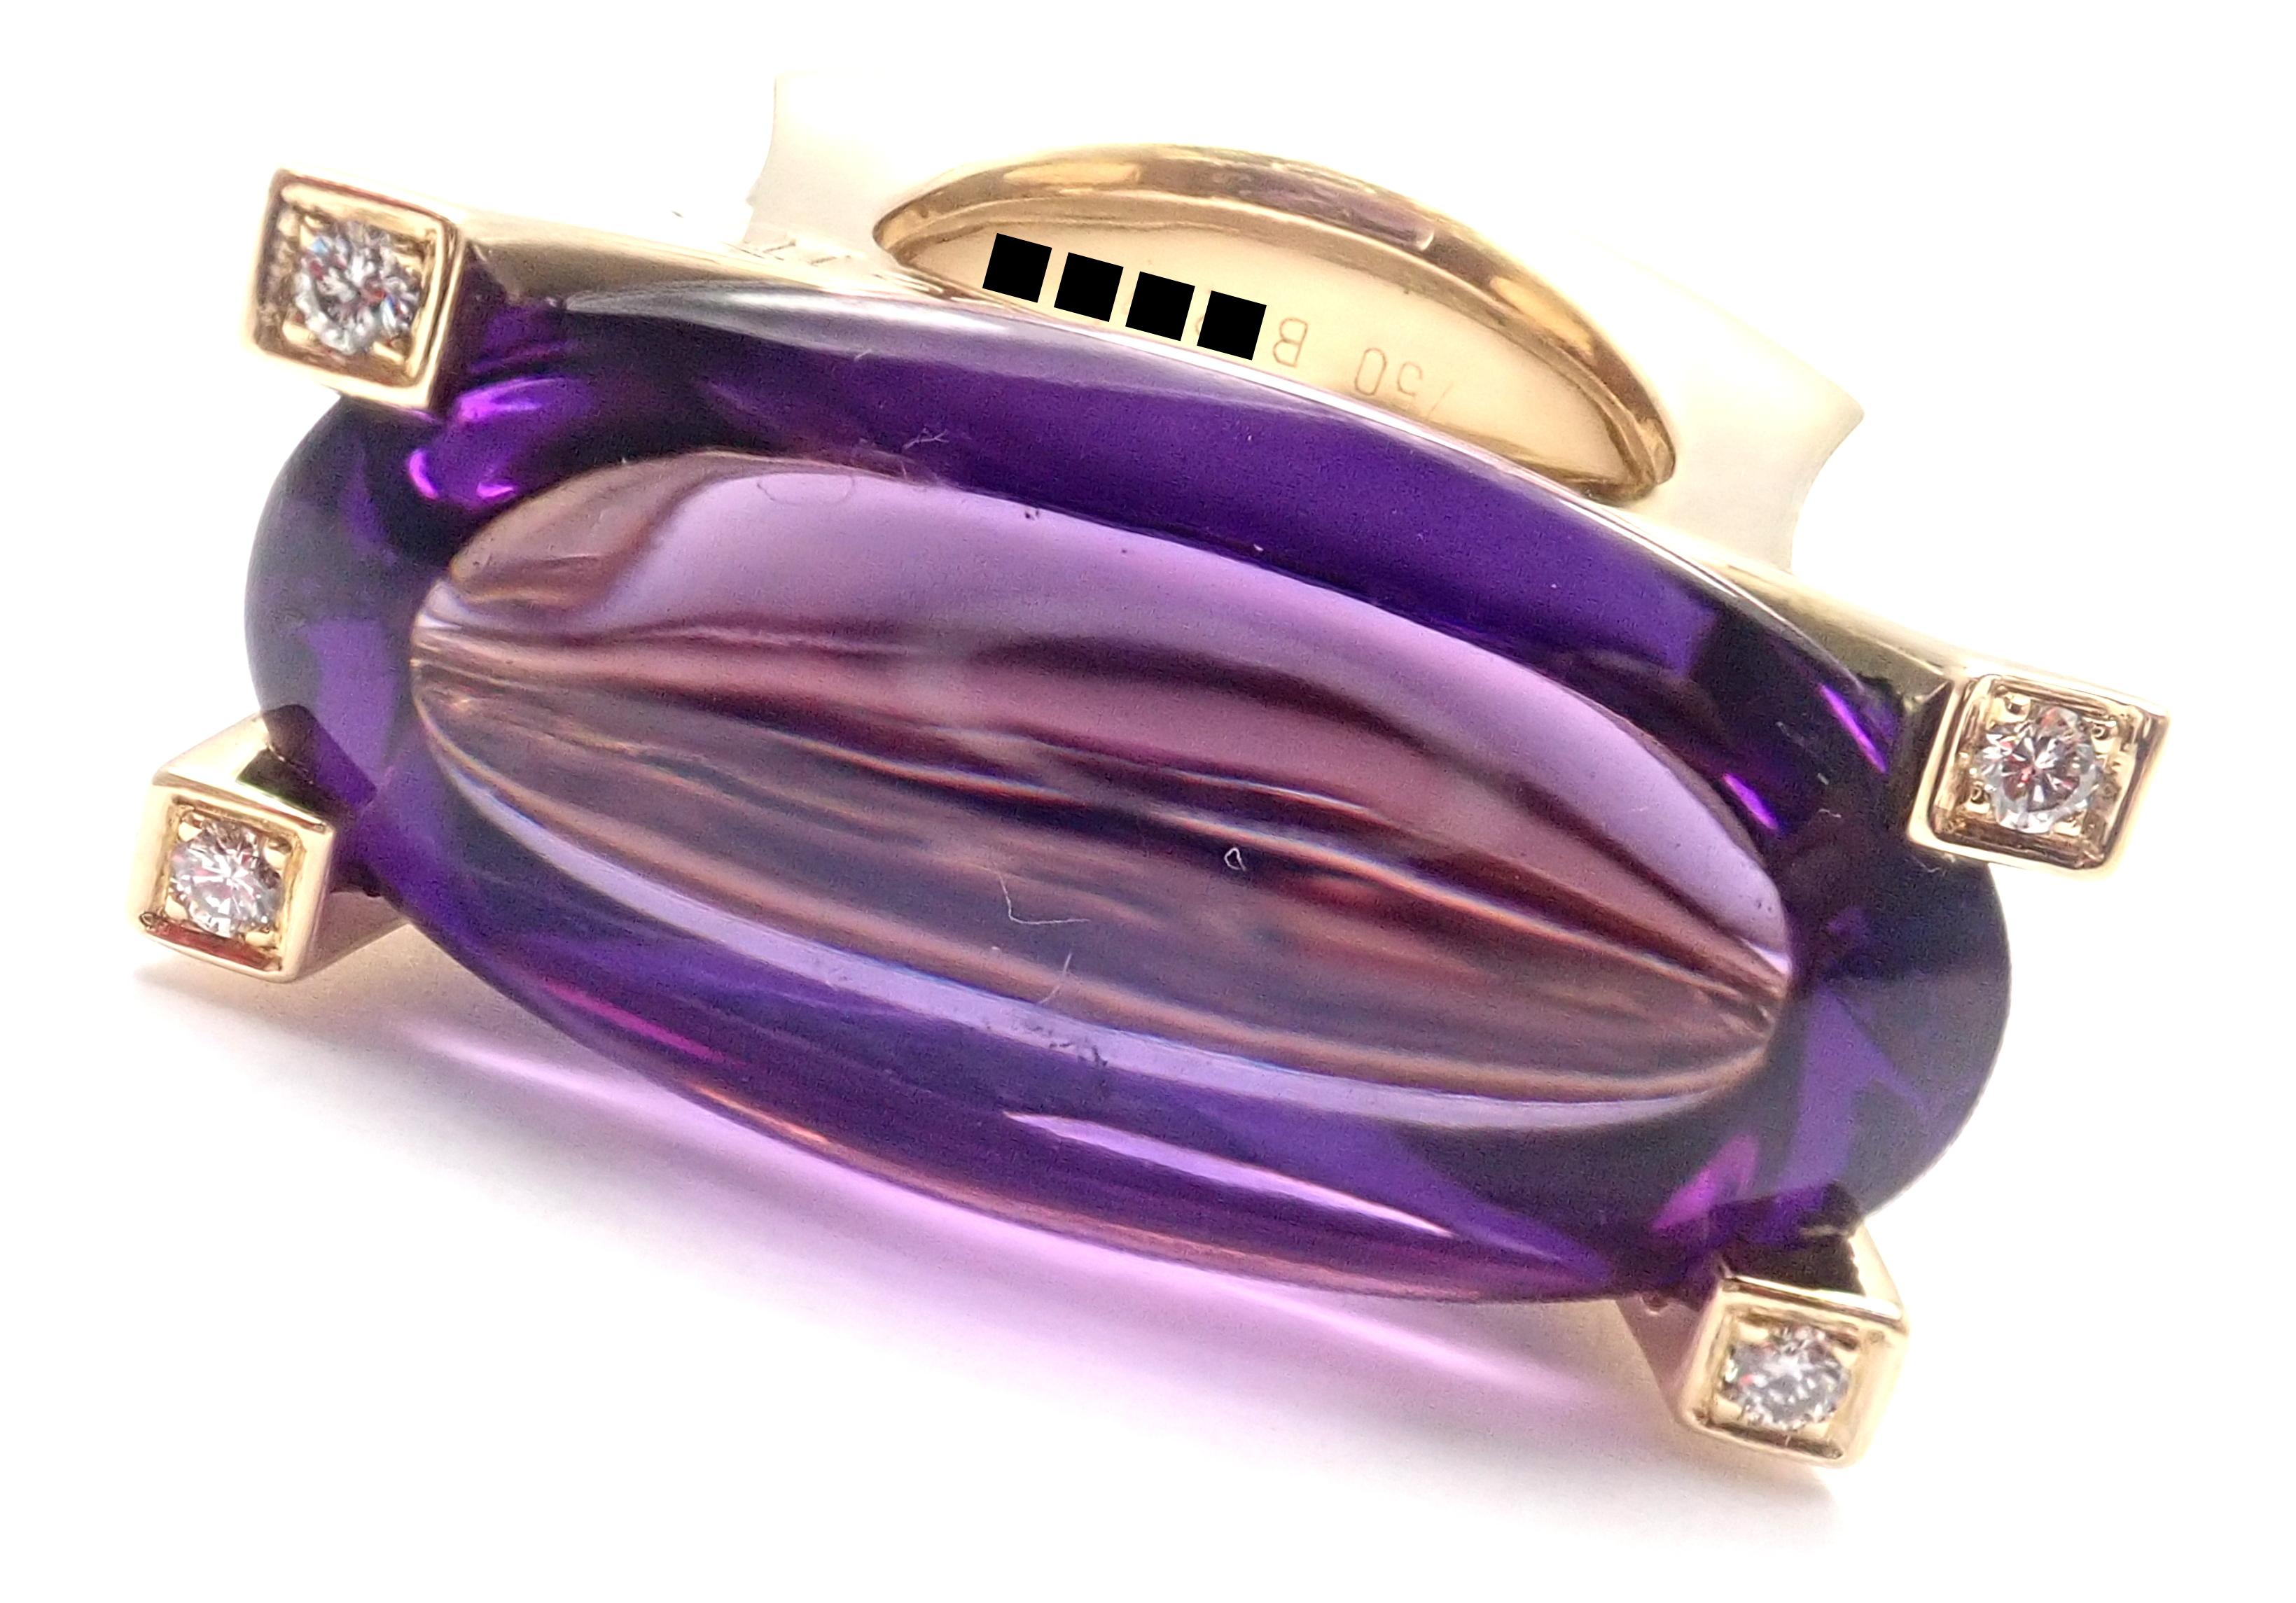 Brilliant Cut Van Cleef & Arpels Diamond Large Amethyst Yellow Gold Ring For Sale